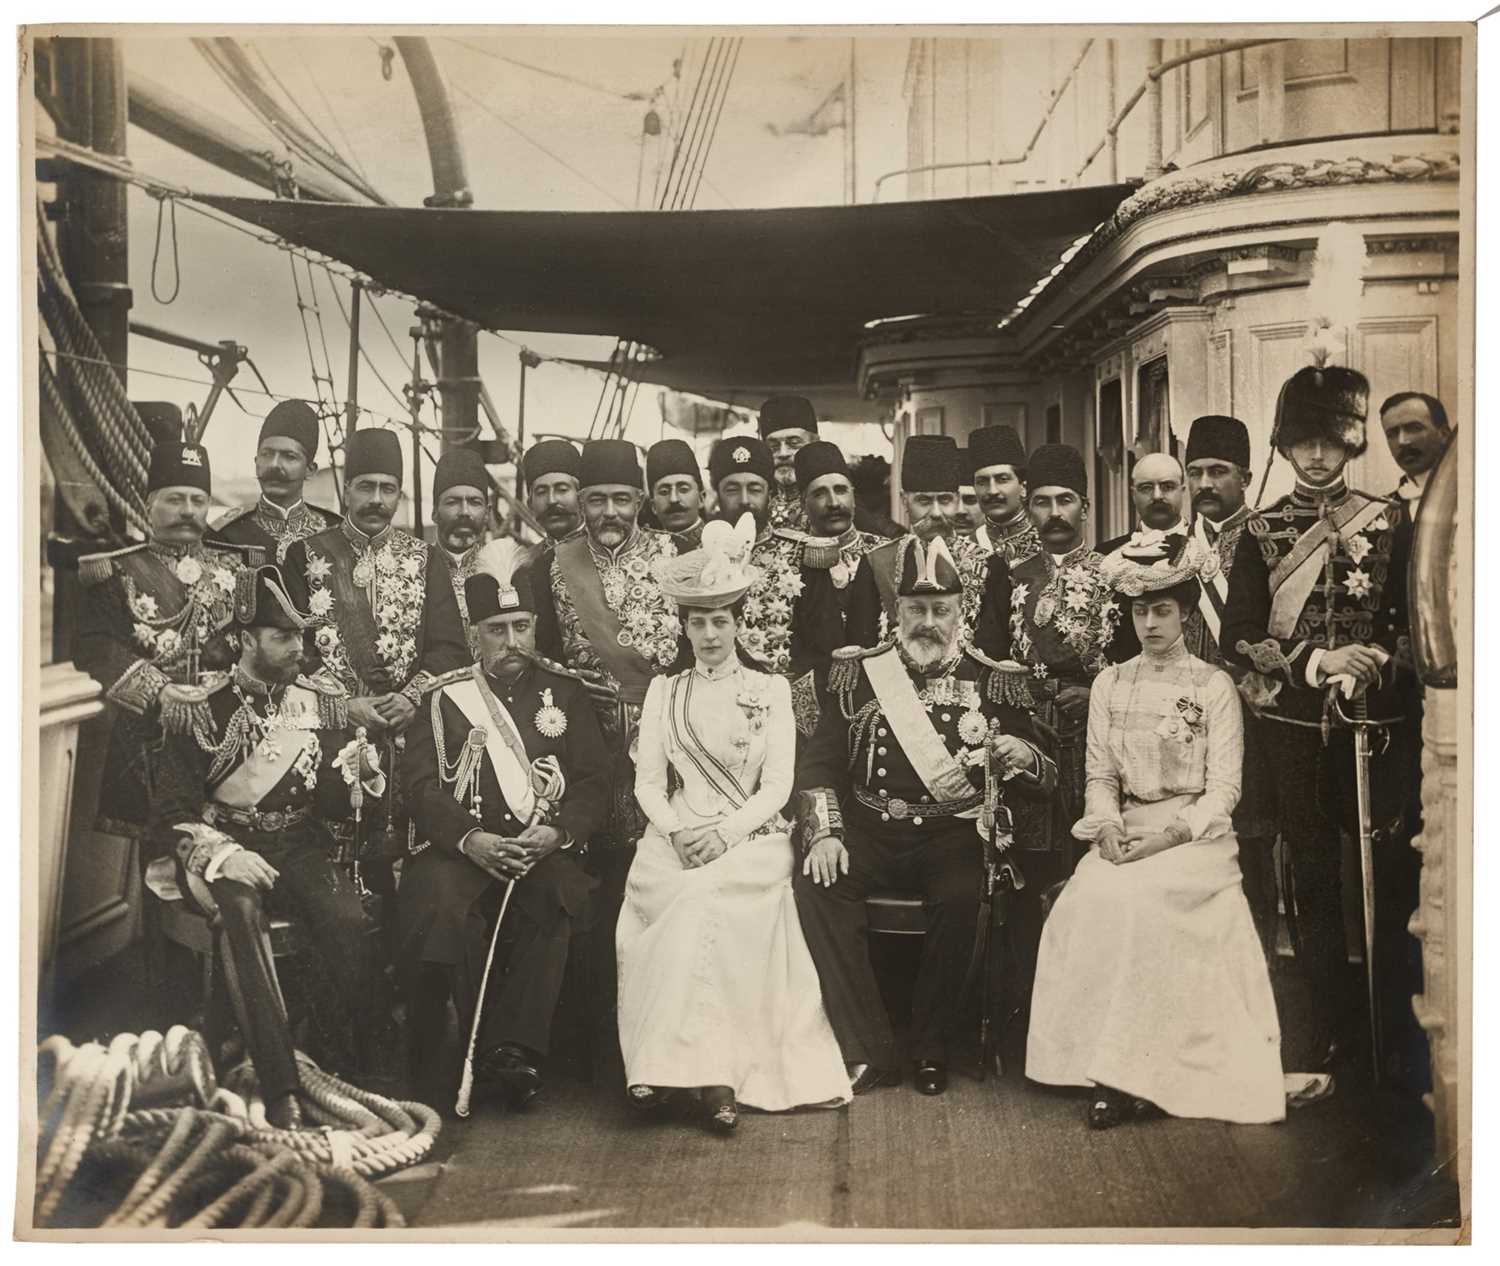 Lot 33 - H.M.King Edward VII and family, fine portrait photograph of The King and family entertaining The Shah of Persia and his entourage on board The Royal Yacht Victoria & Albert, Portsmouth 18th August...